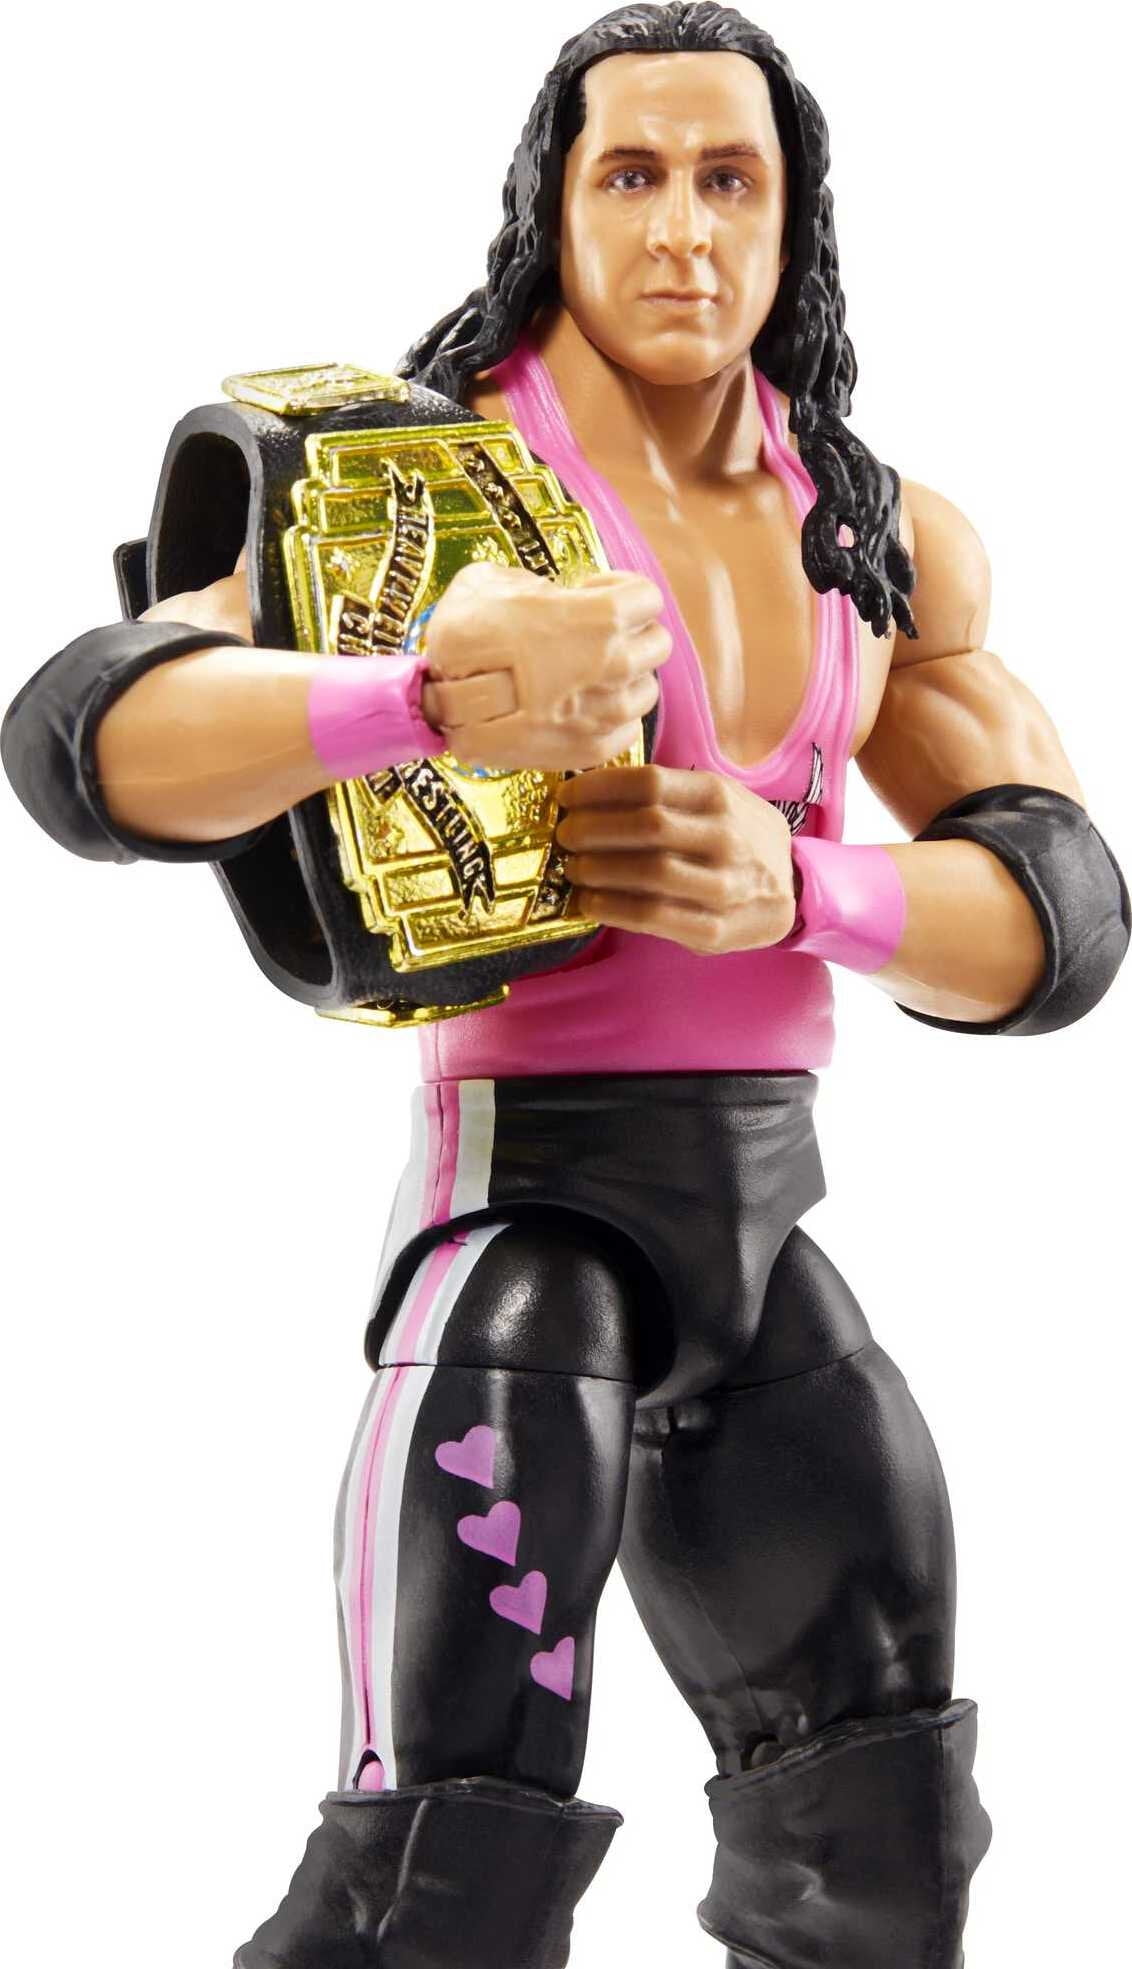 WWE Bret “Hit Man” Hart Elite Collection Action Figure, 6-Inch